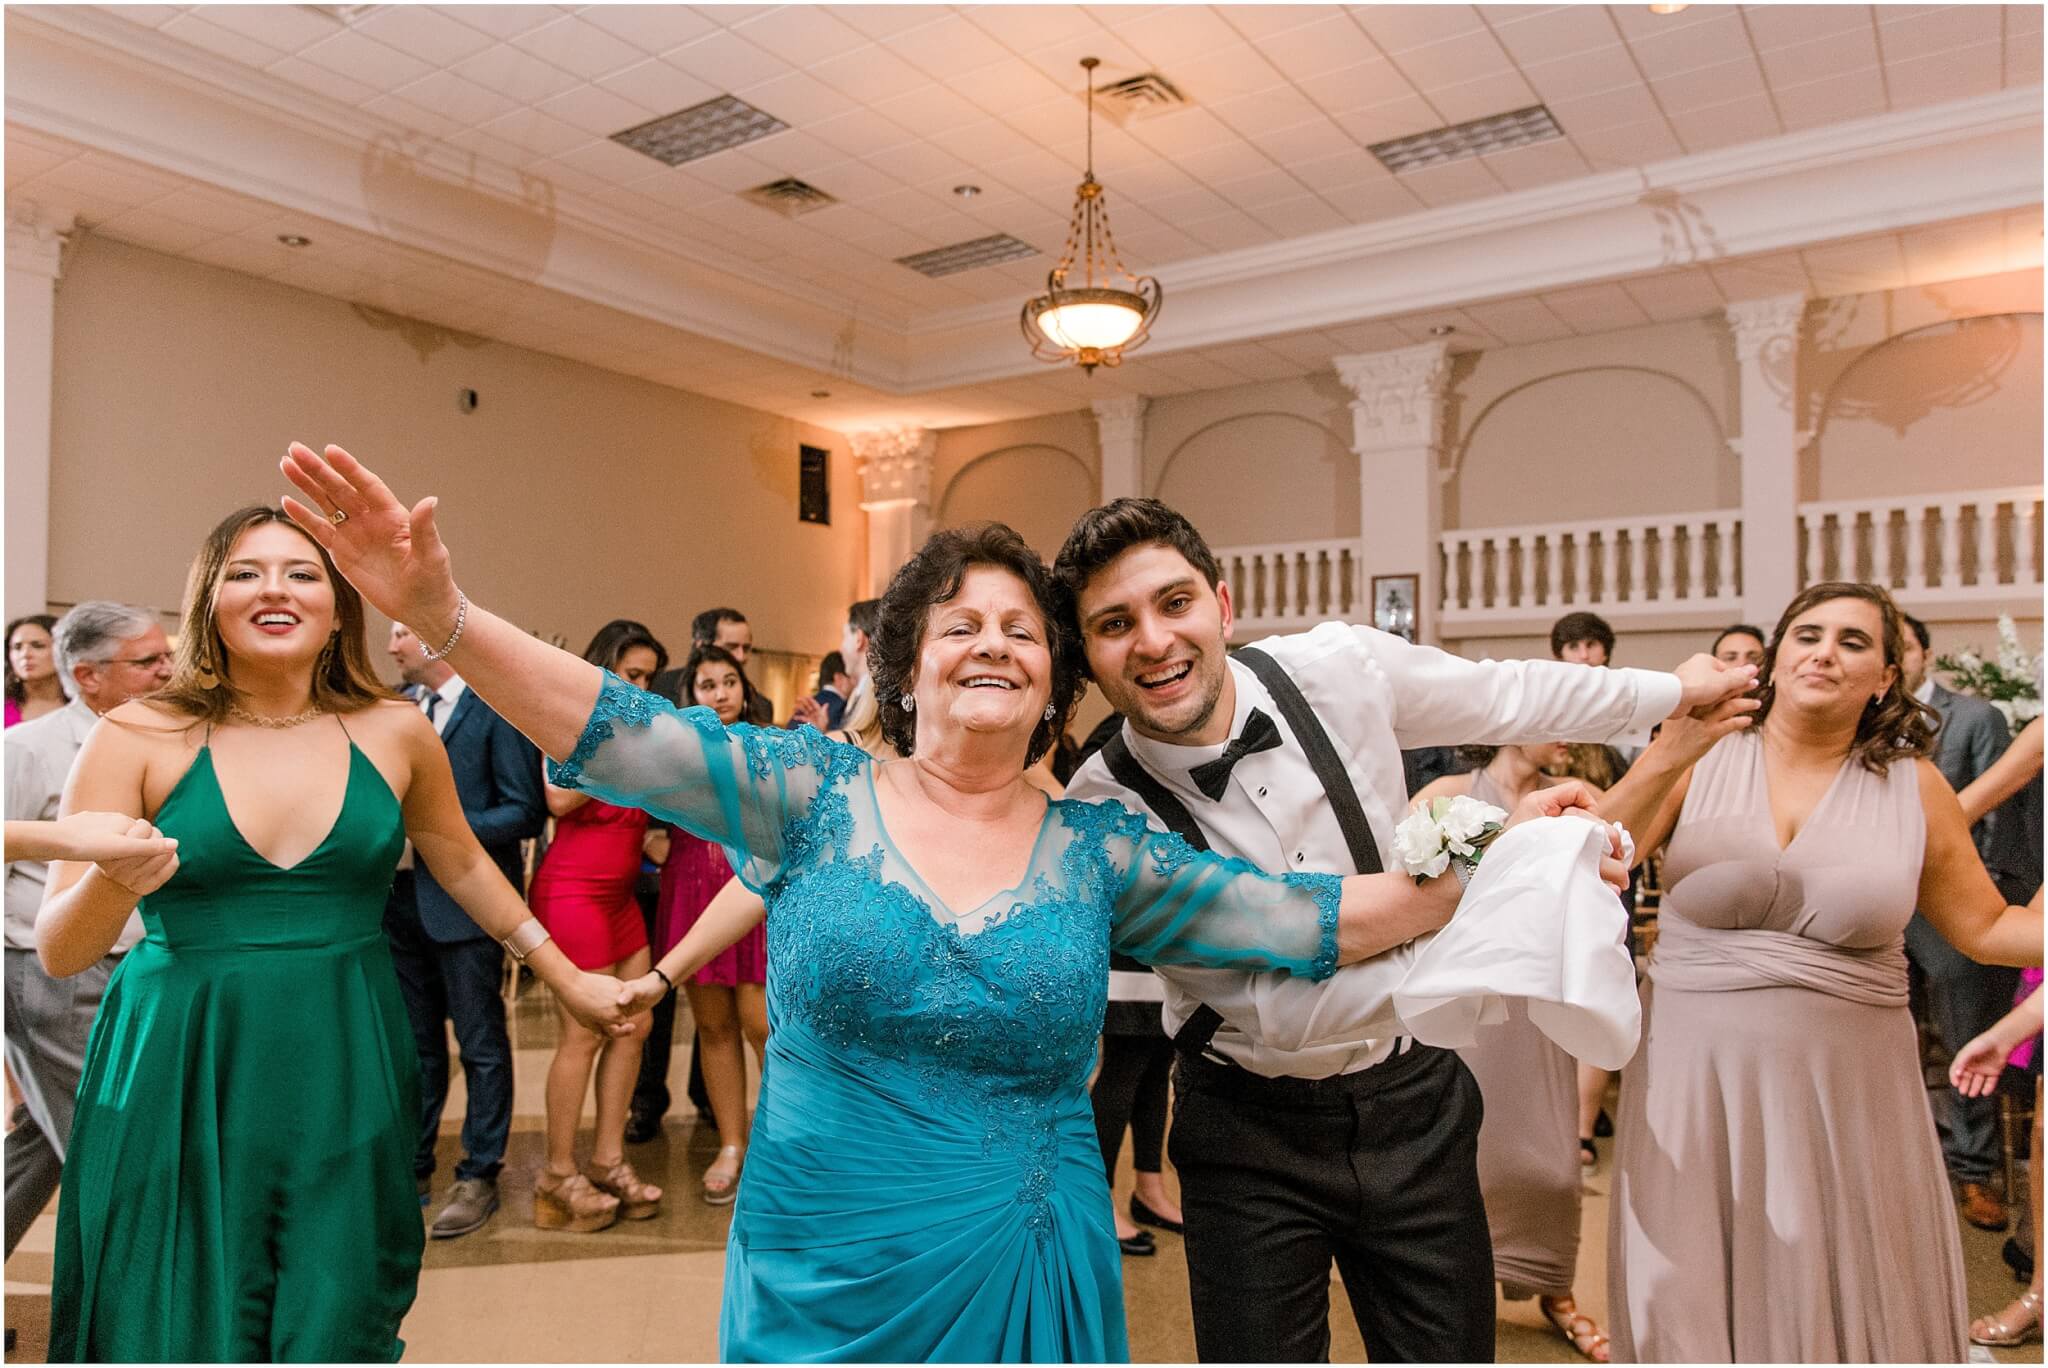 Grew takes a picture with grandma at wedding reception